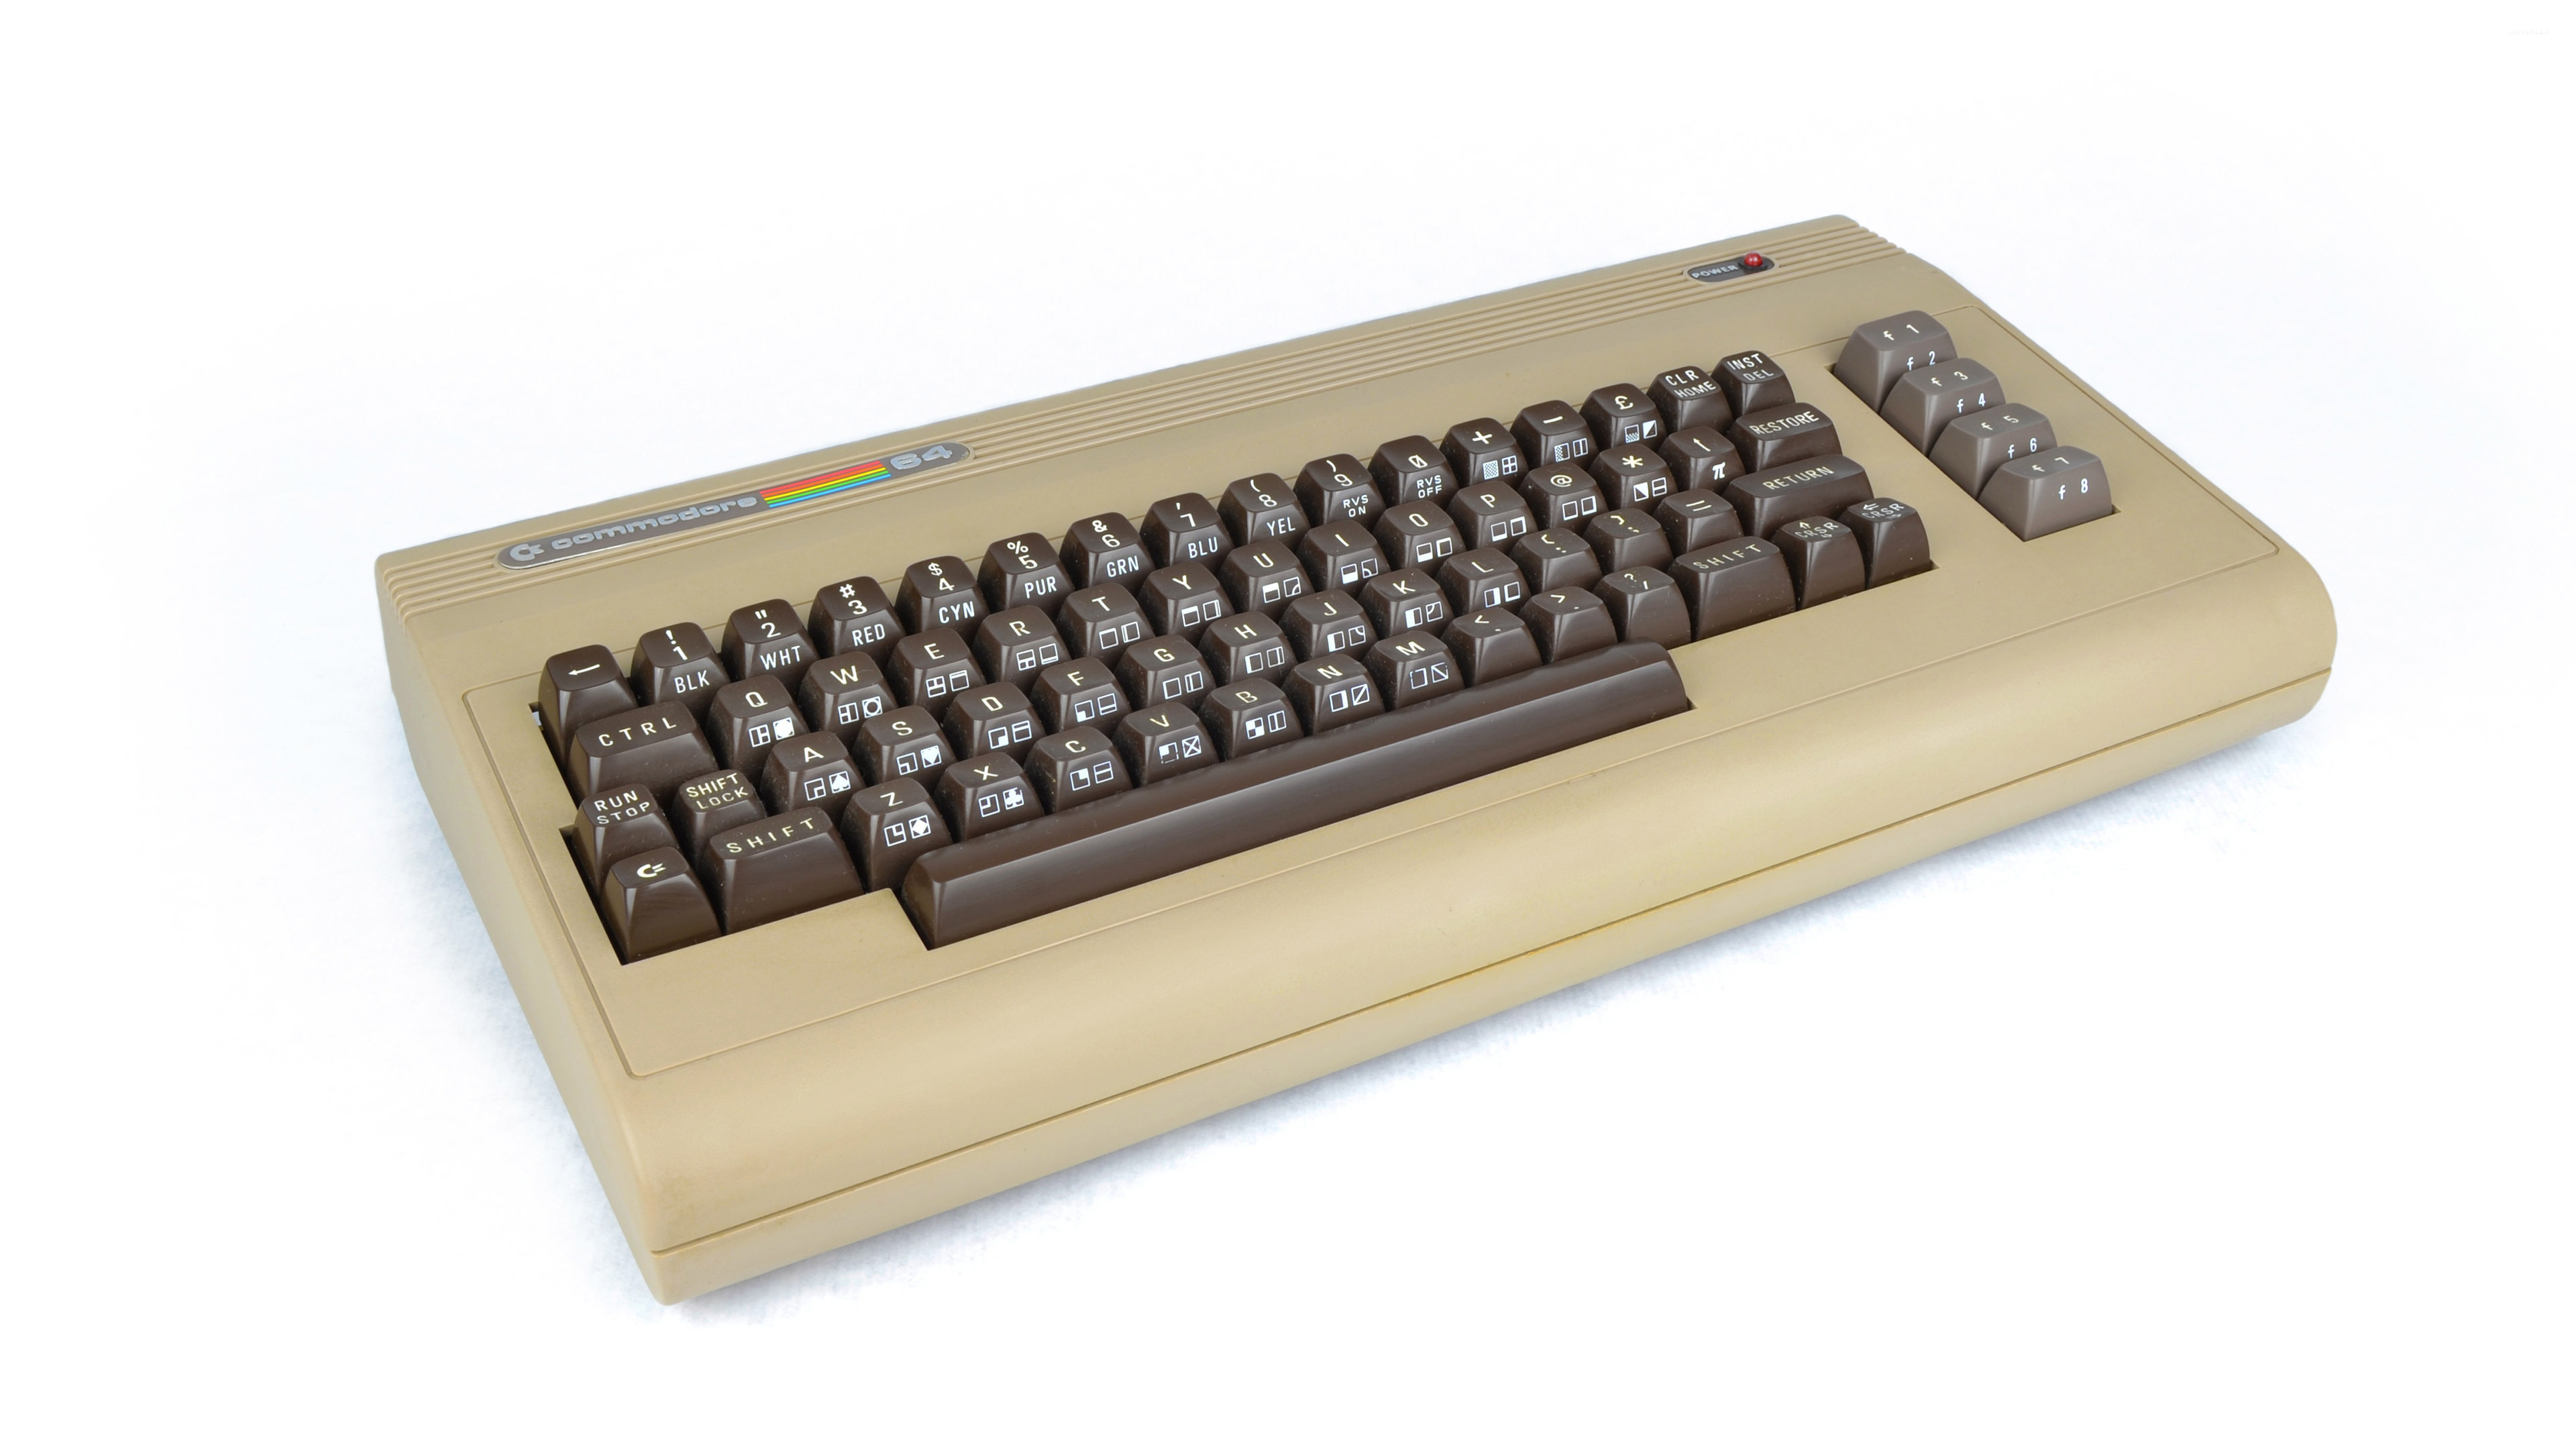 Commodore 64 , HD Wallpaper & Backgrounds